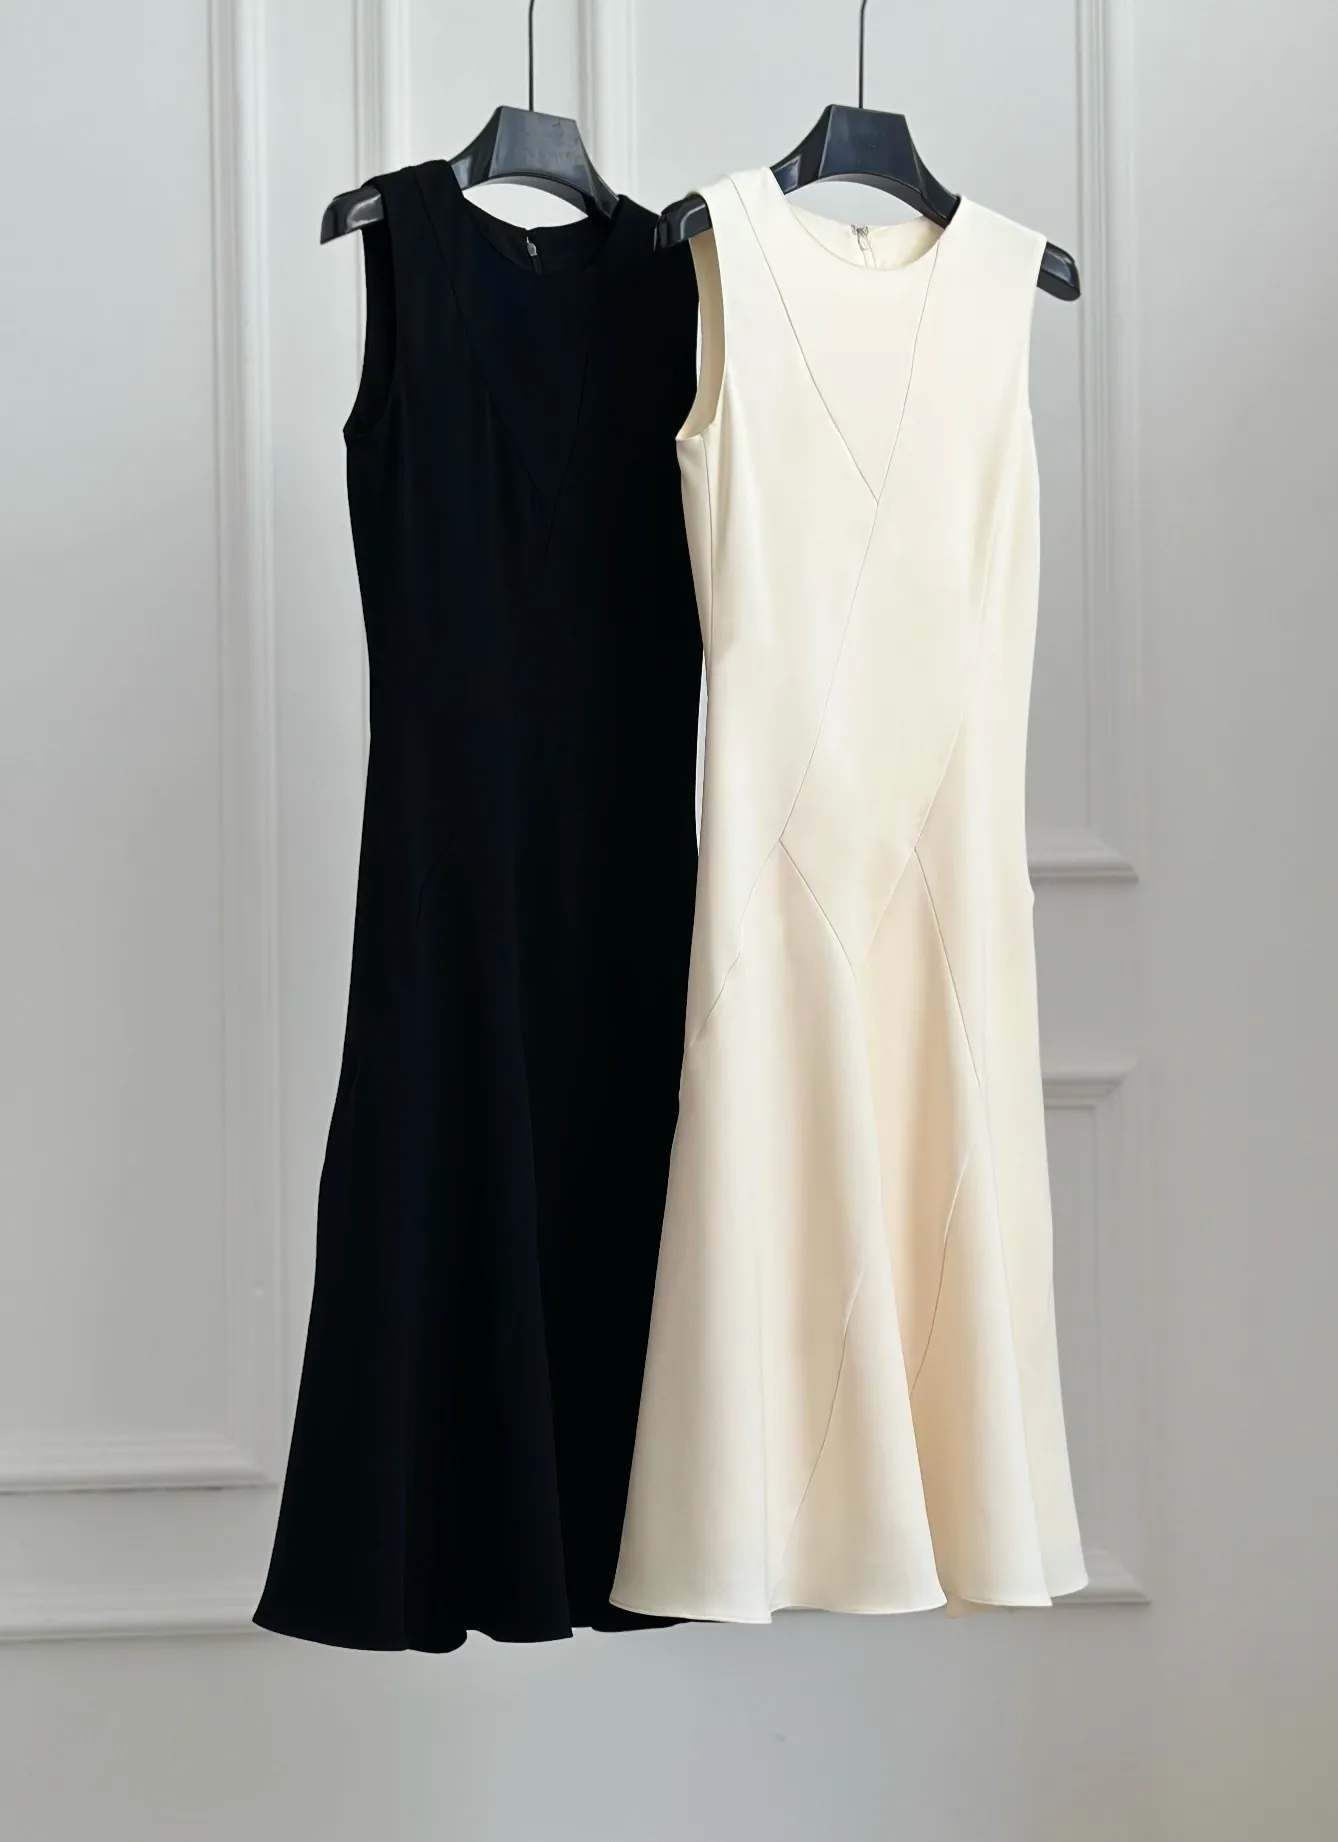 French waist collection black and white two color jumpsuit type skirt daily basis does not go wrong